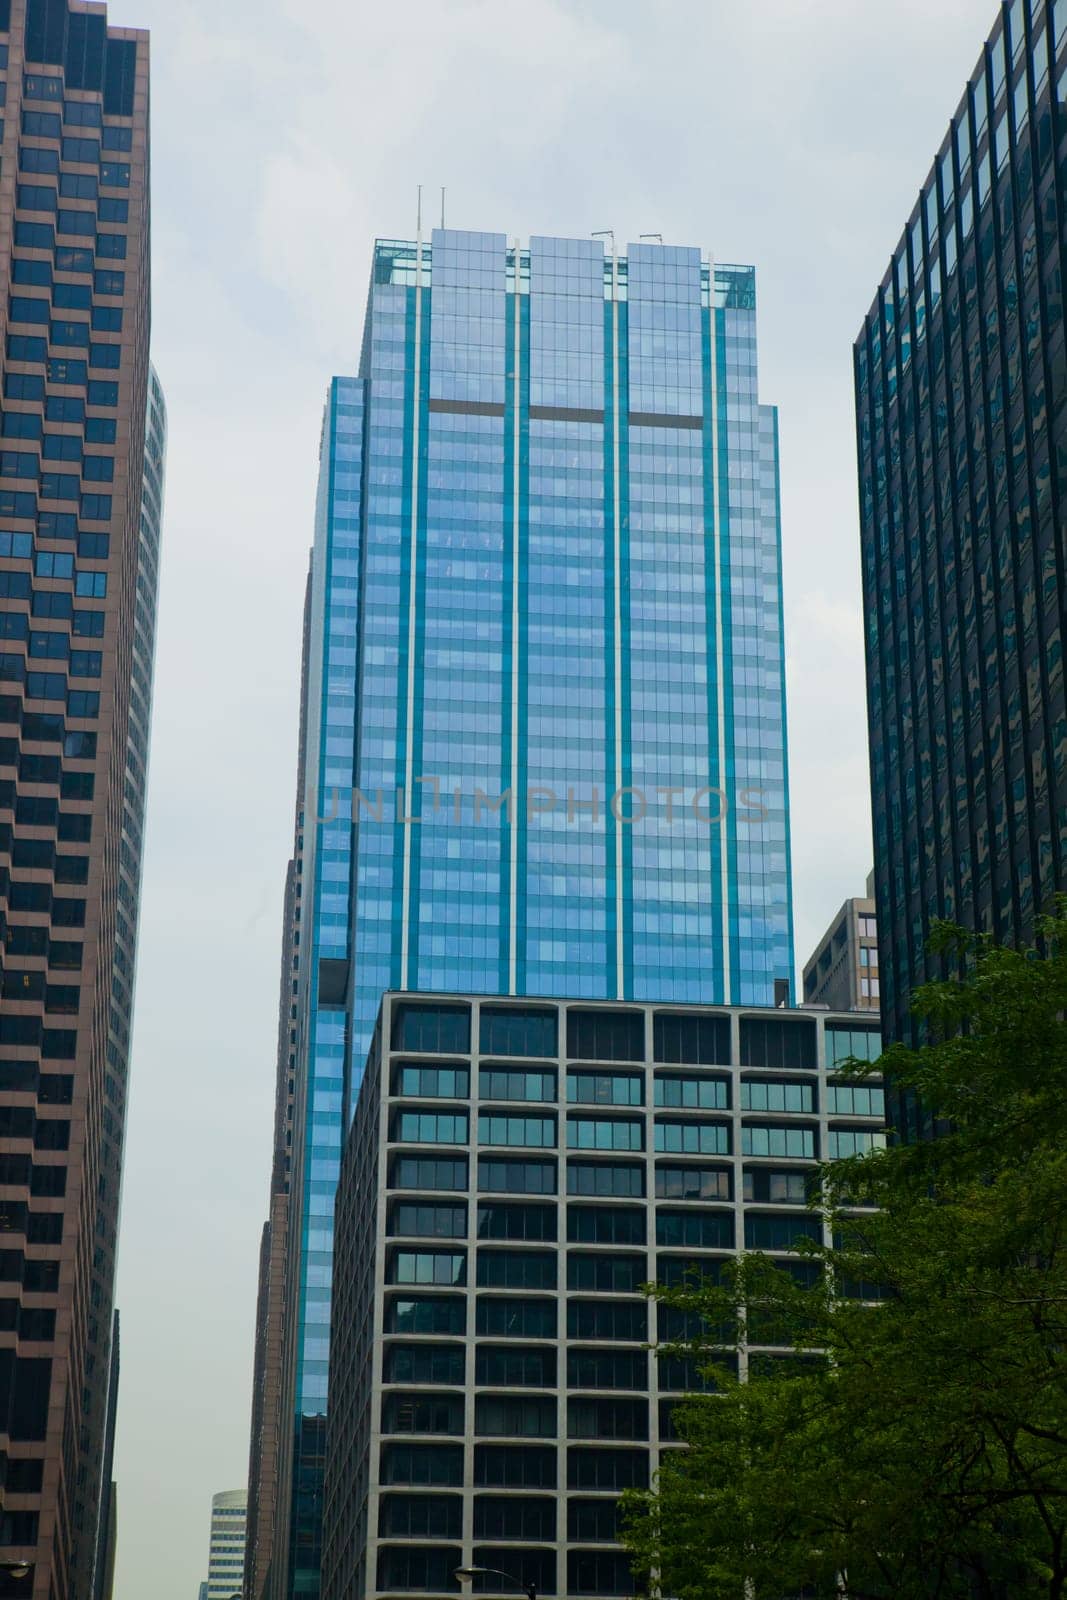 Urban Canyon: Glass Skyscraper Amid High-Rises in Chicago's Business District by njproductions